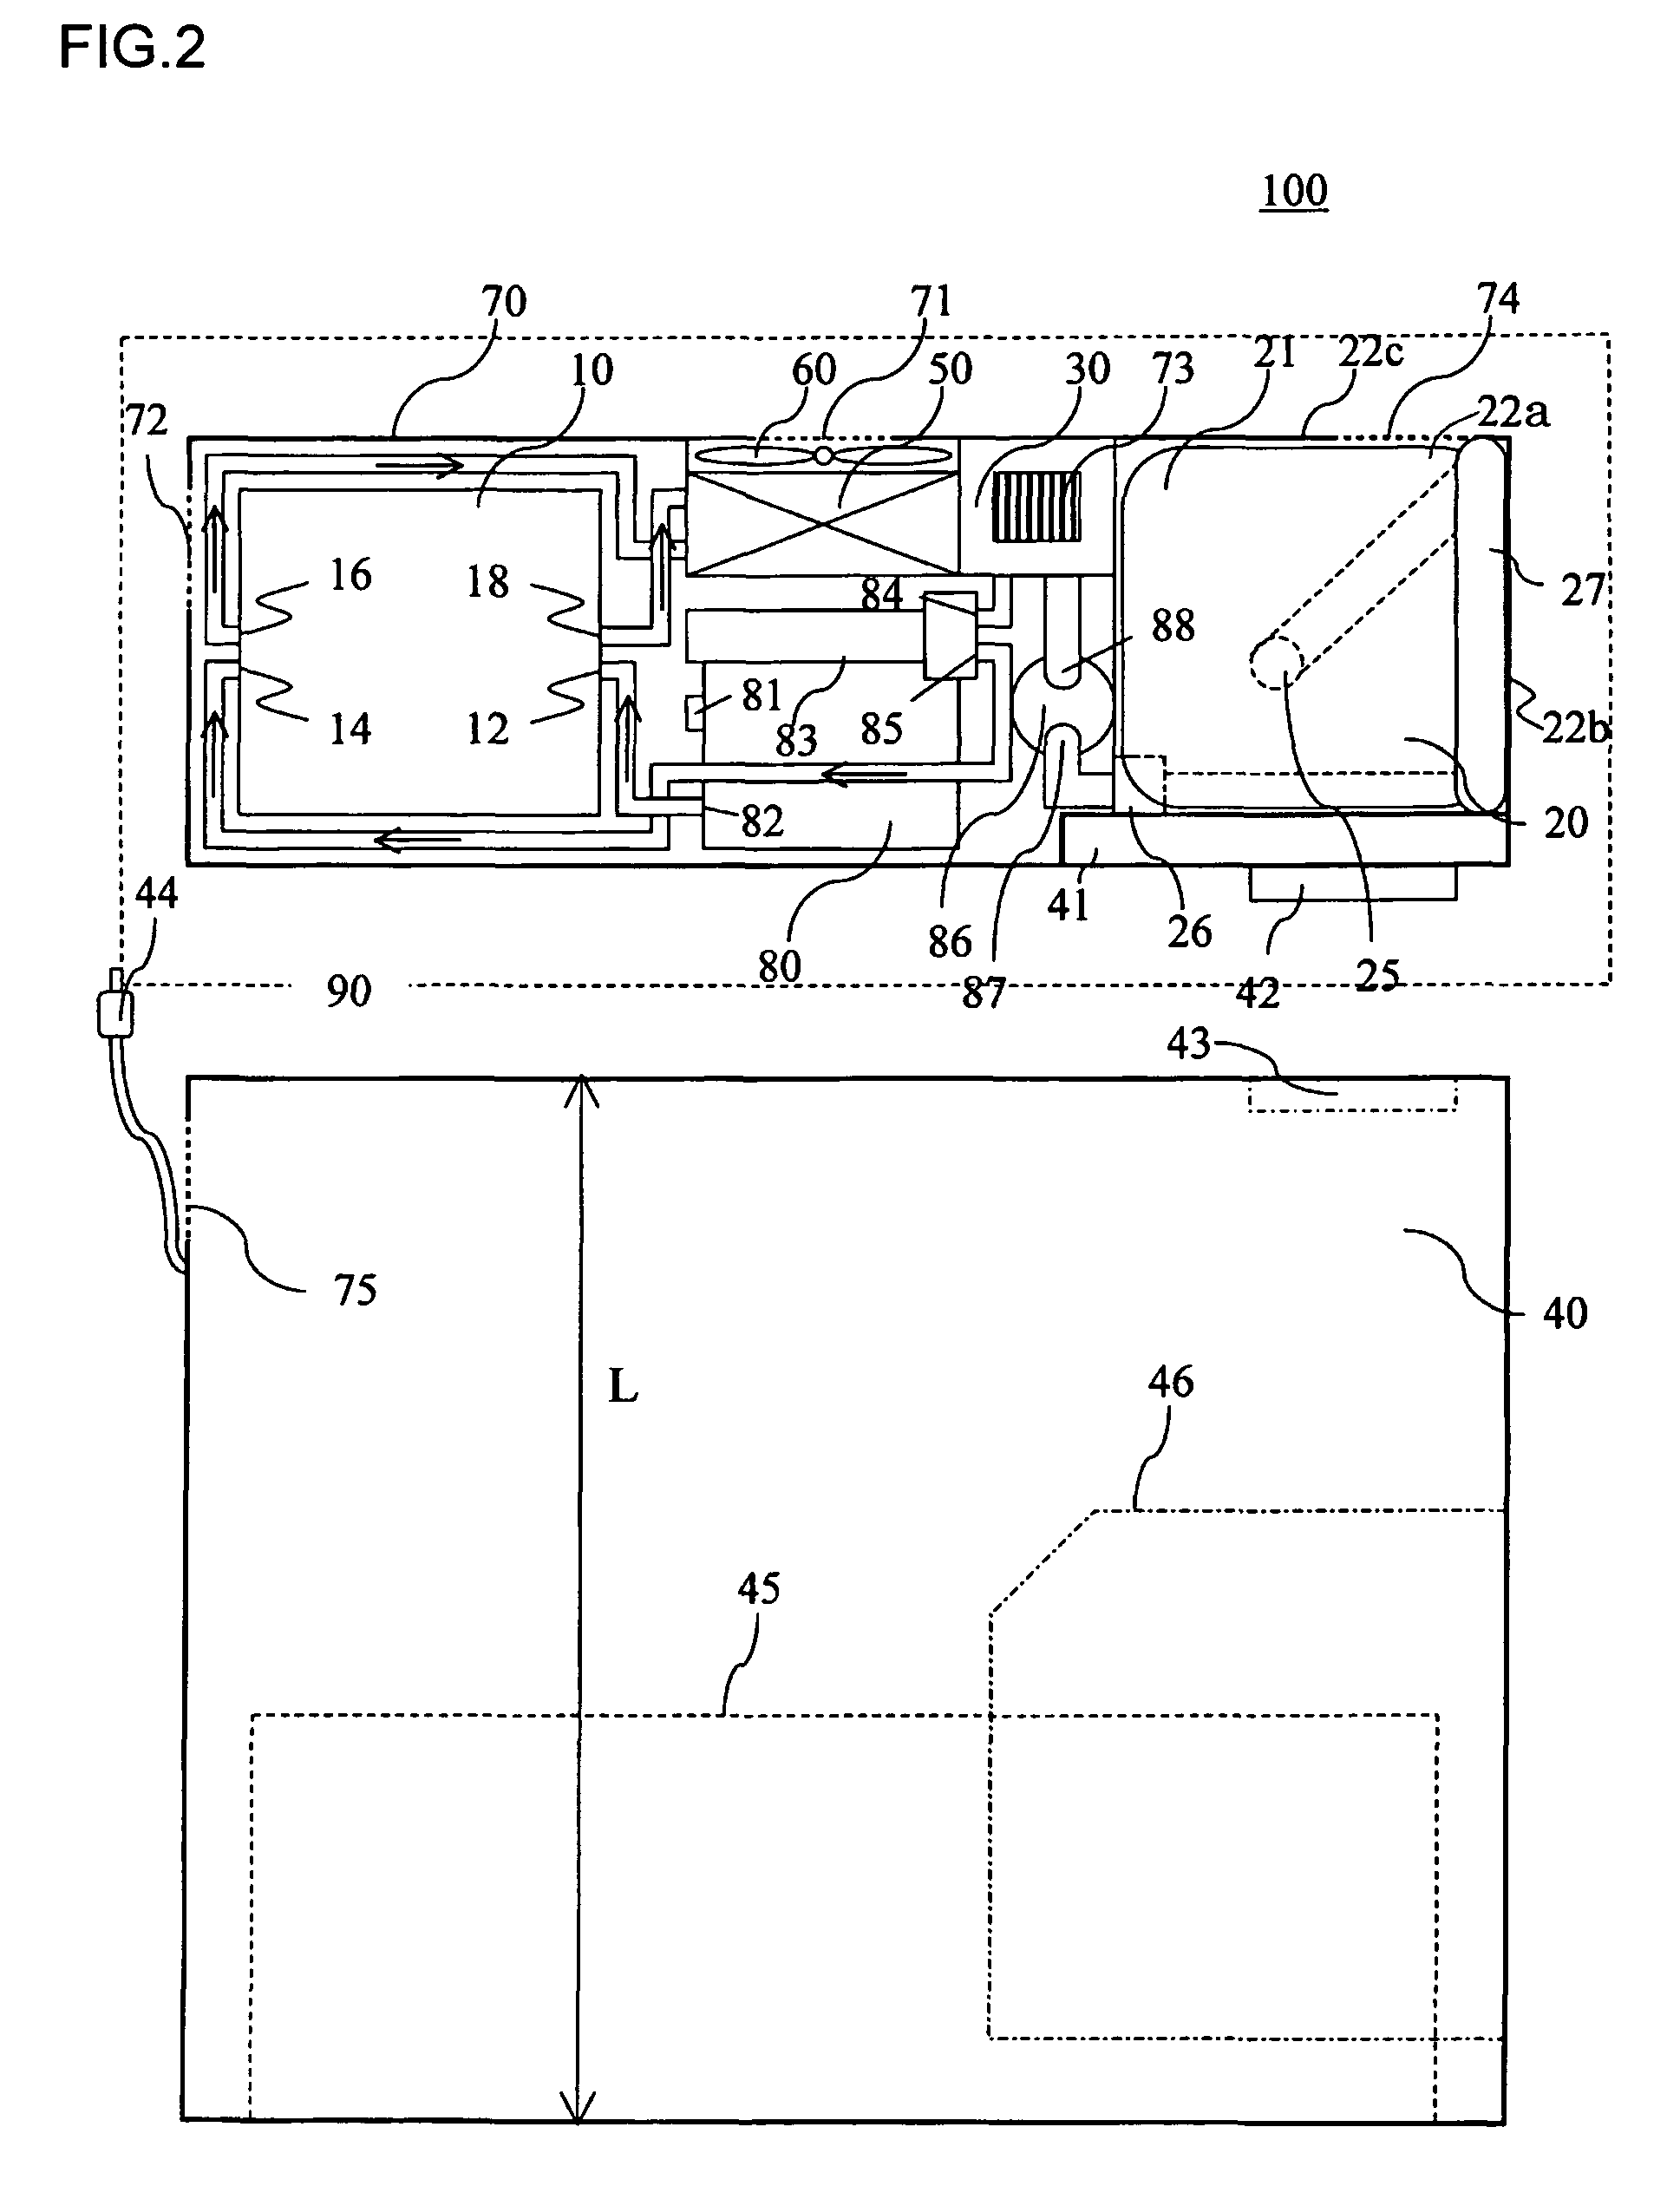 Liquid tank and fuel cell system with fuel monitoring